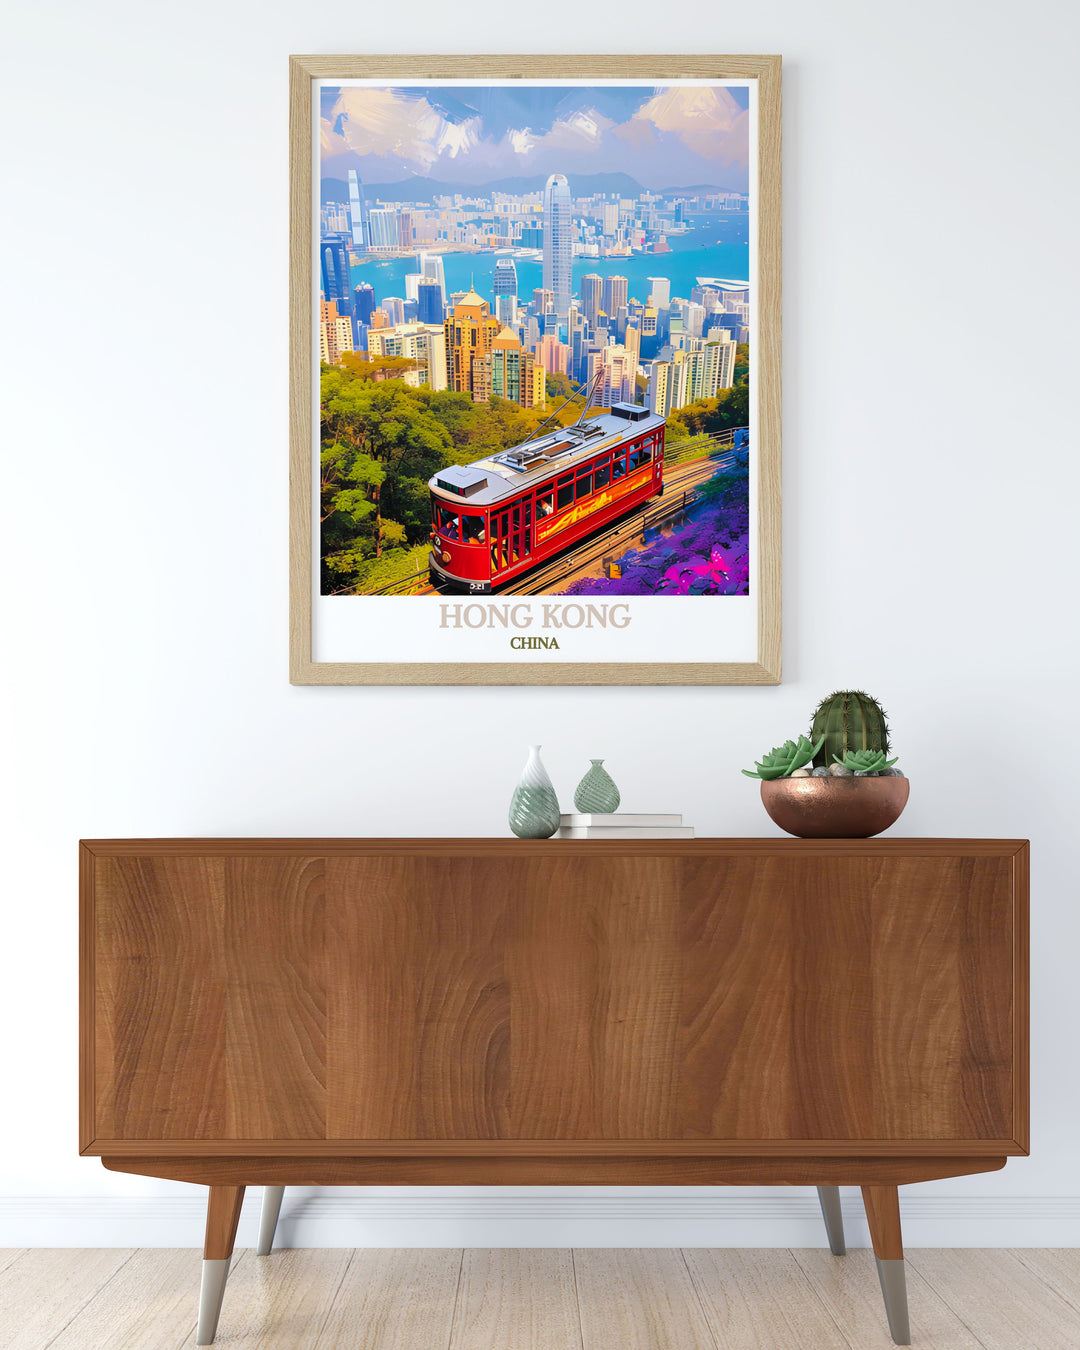 The vibrant cityscape of Hong Kong is highlighted in this travel poster, featuring its towering skyscrapers and bustling streets. Ideal for those who appreciate modern architecture, this piece captures the dynamic spirit of the city.